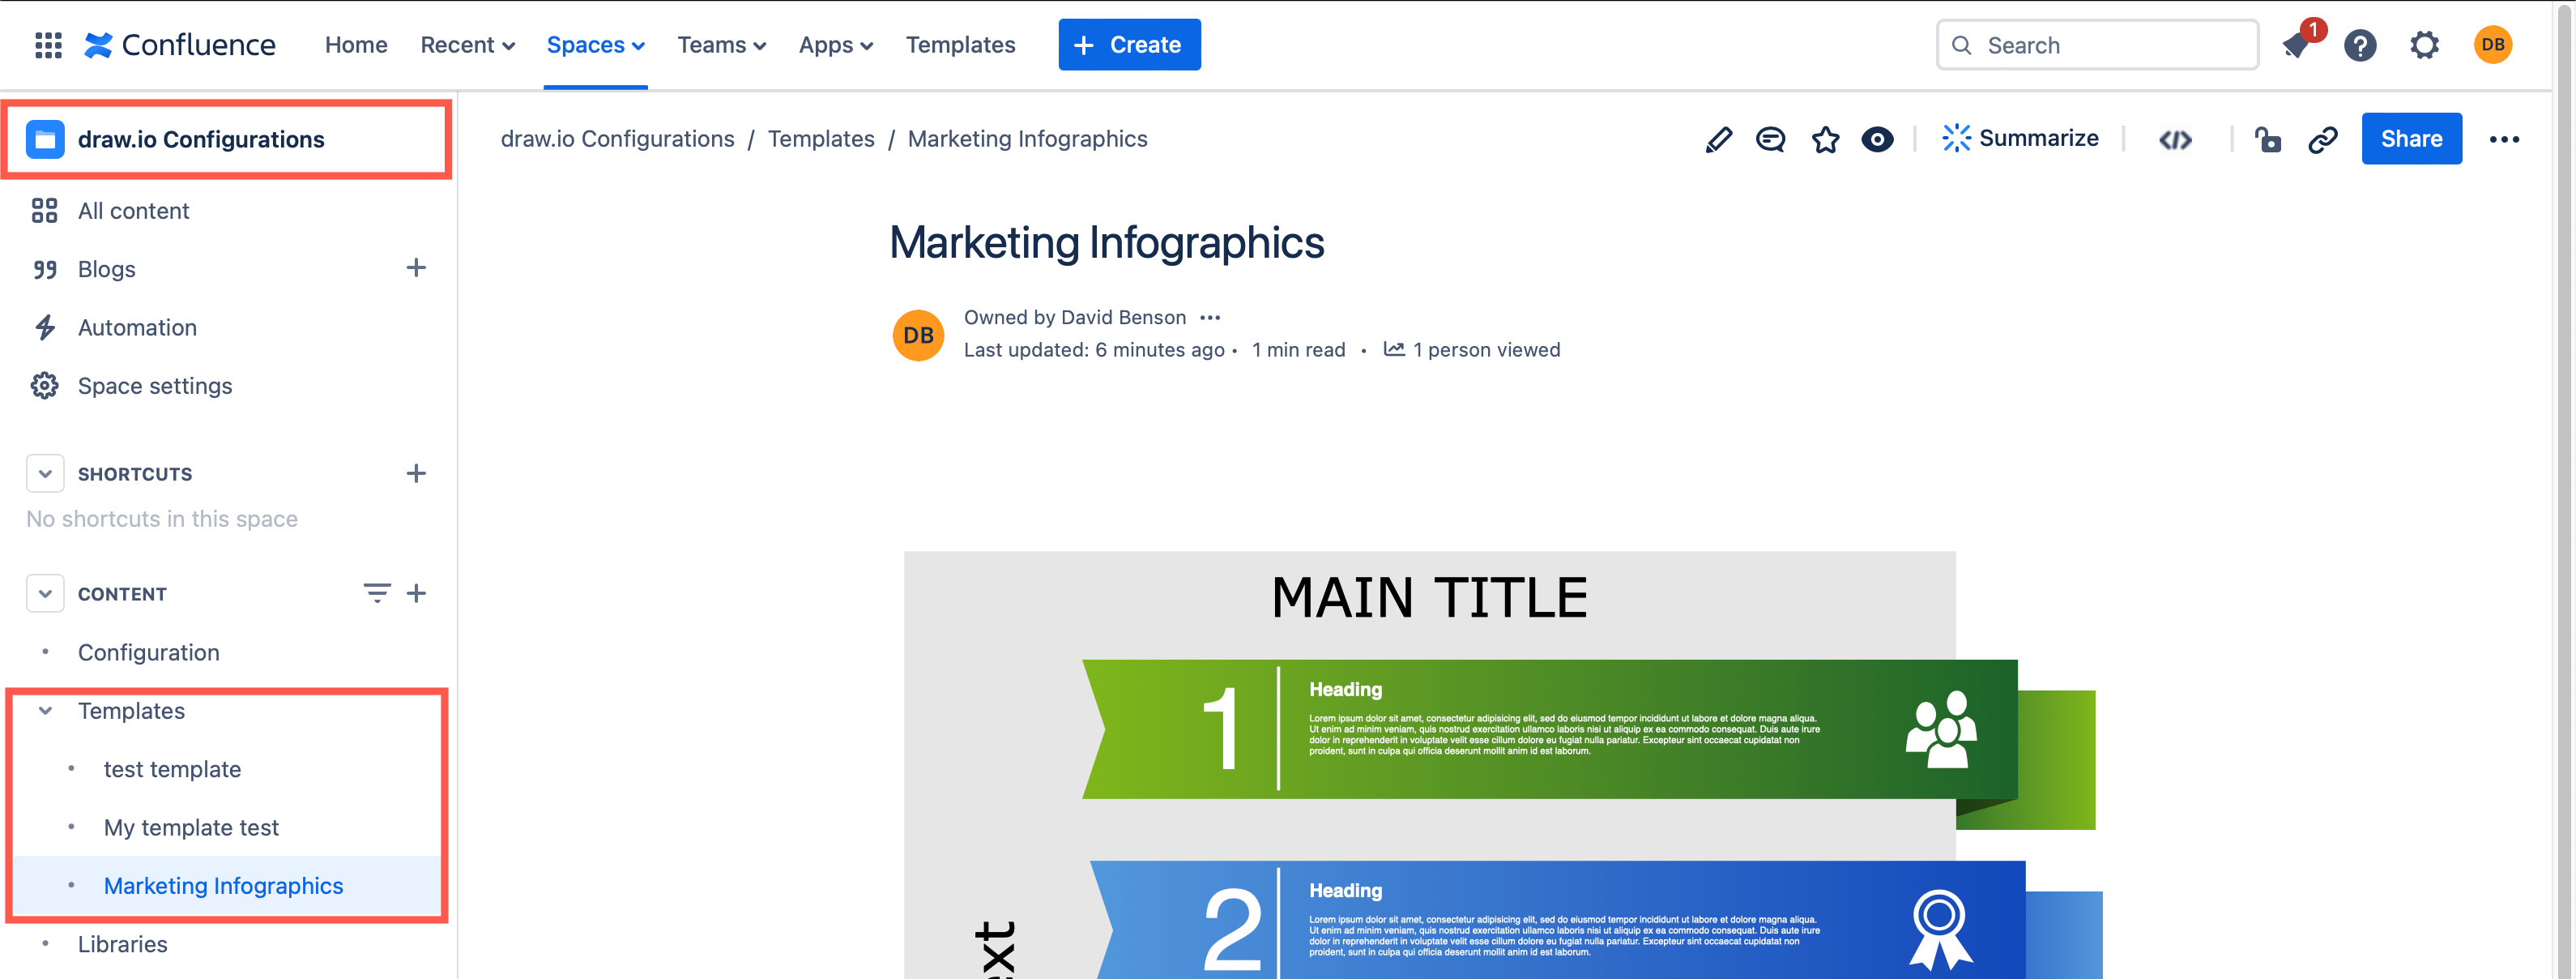 Custom templates are in the draw.io Configurations space in Confluence Cloud